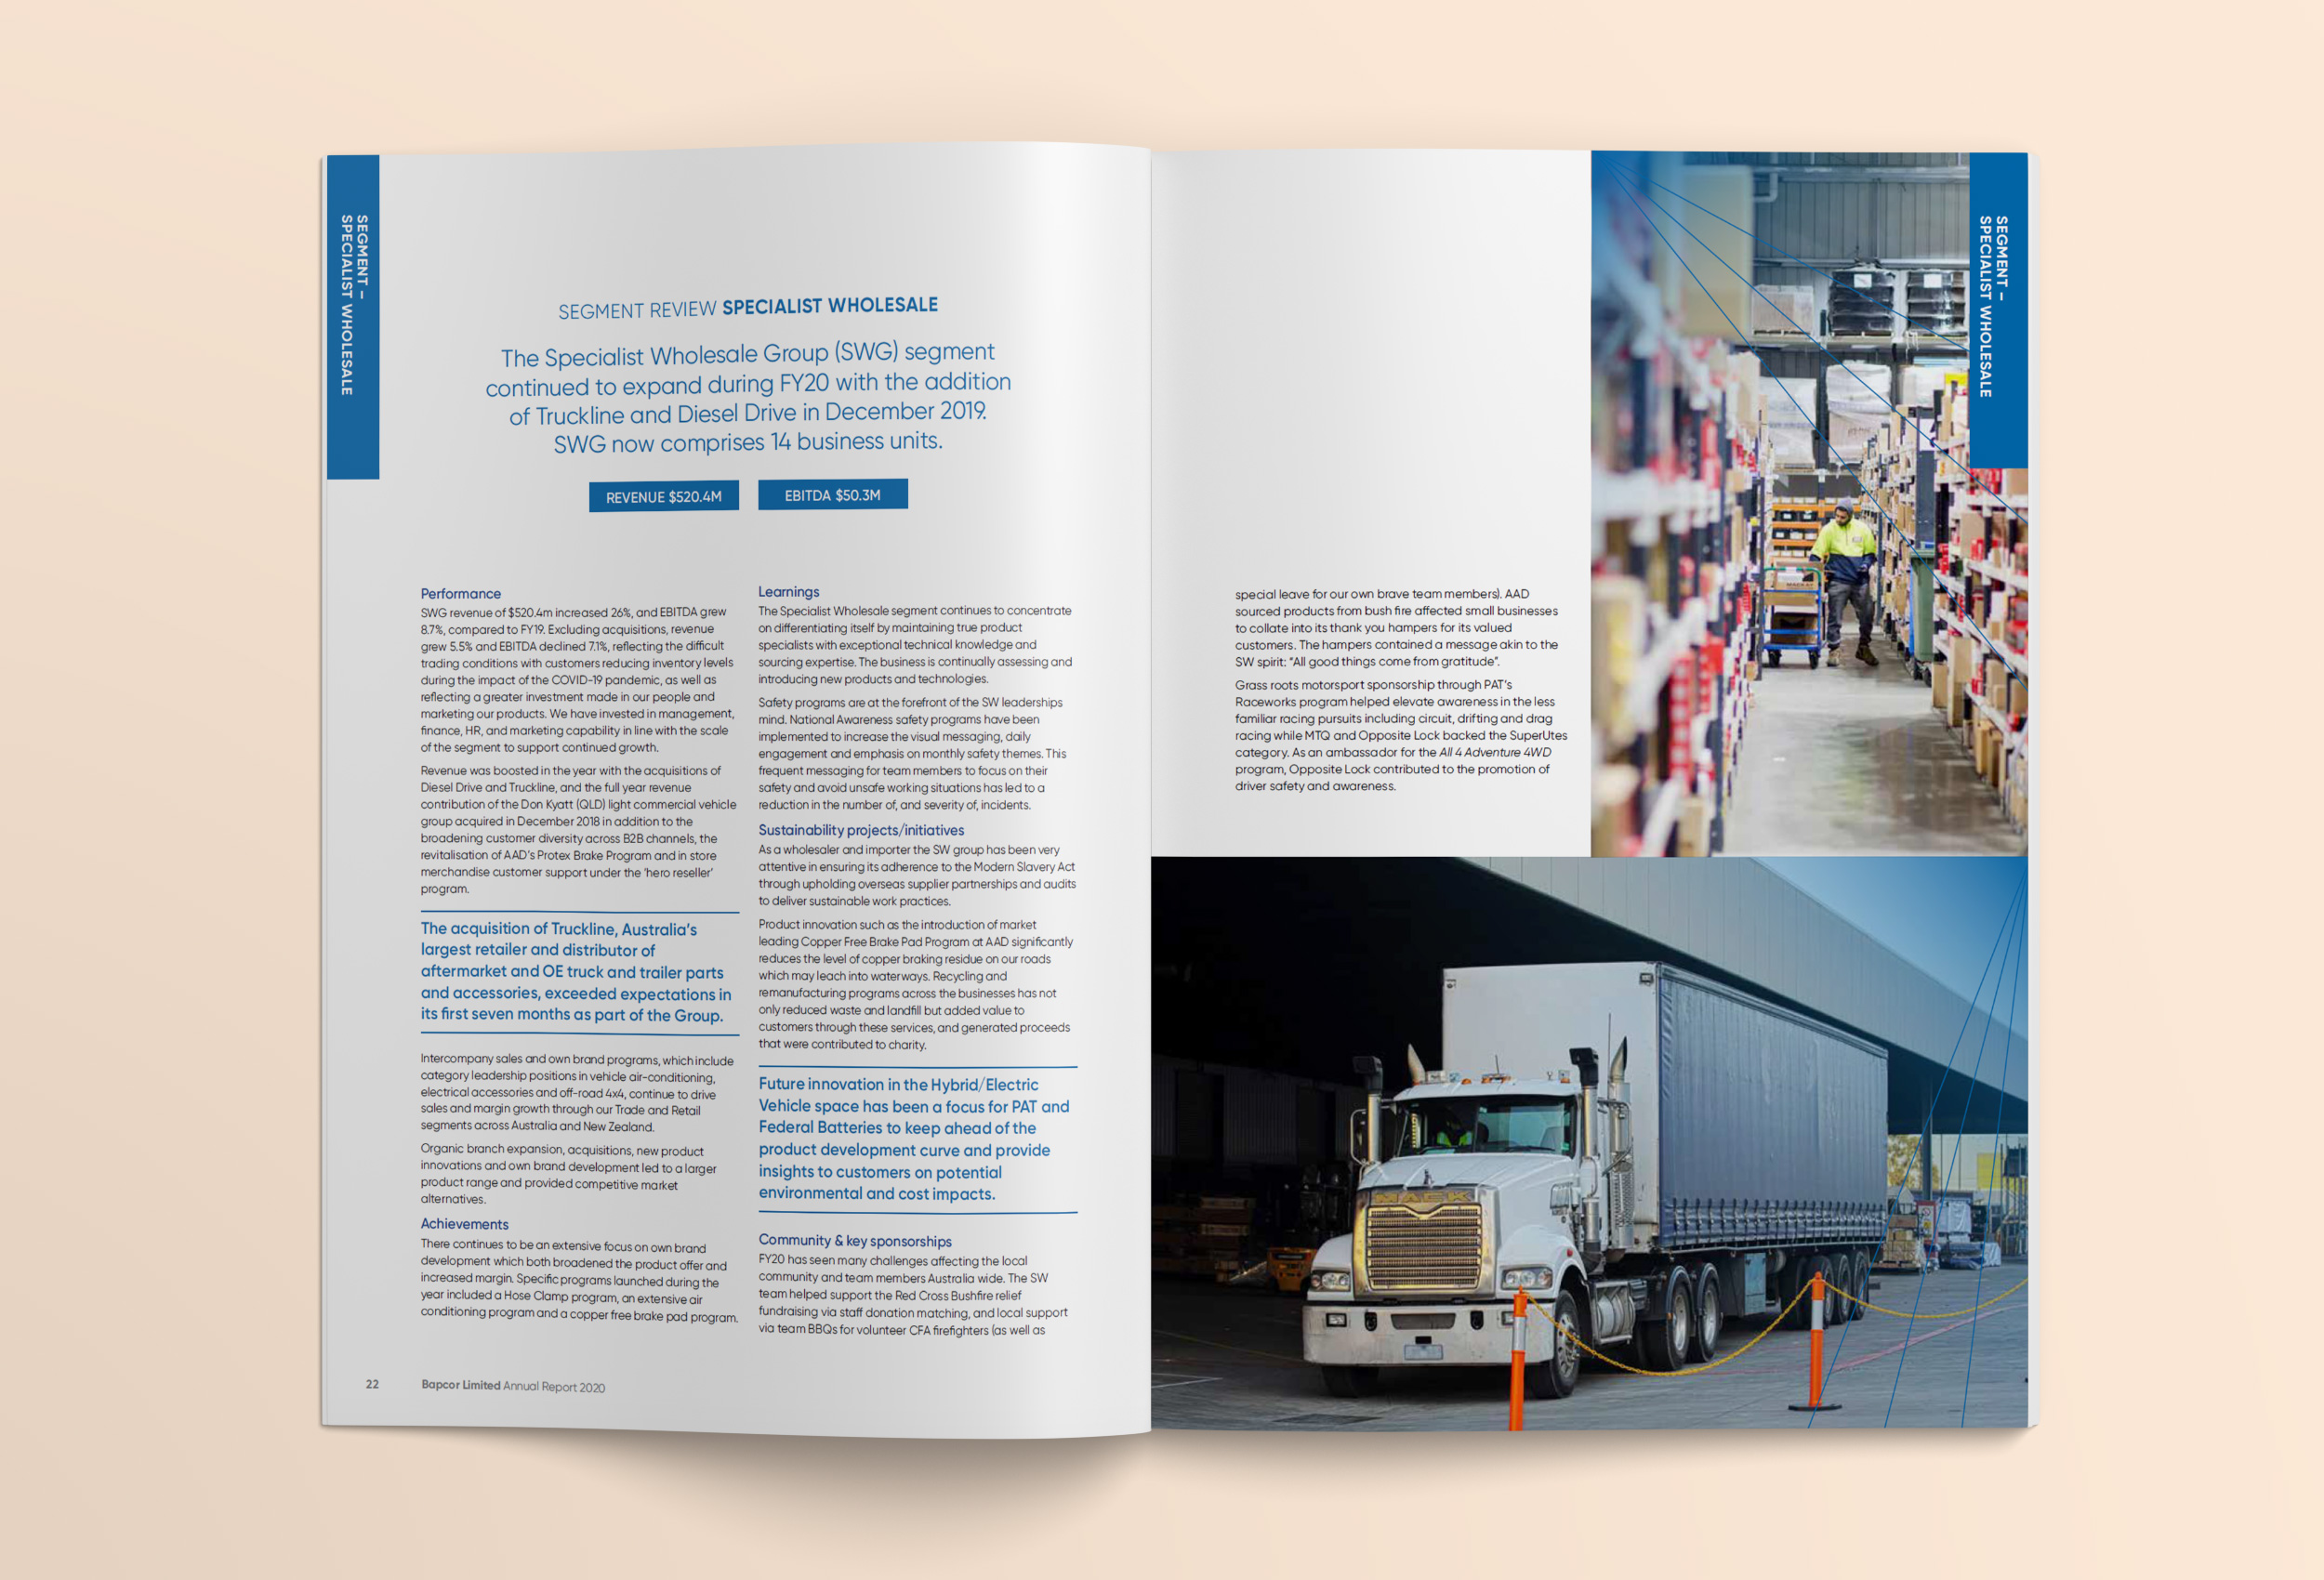 Bapcor Annual Report specialist wholesale internal page layout